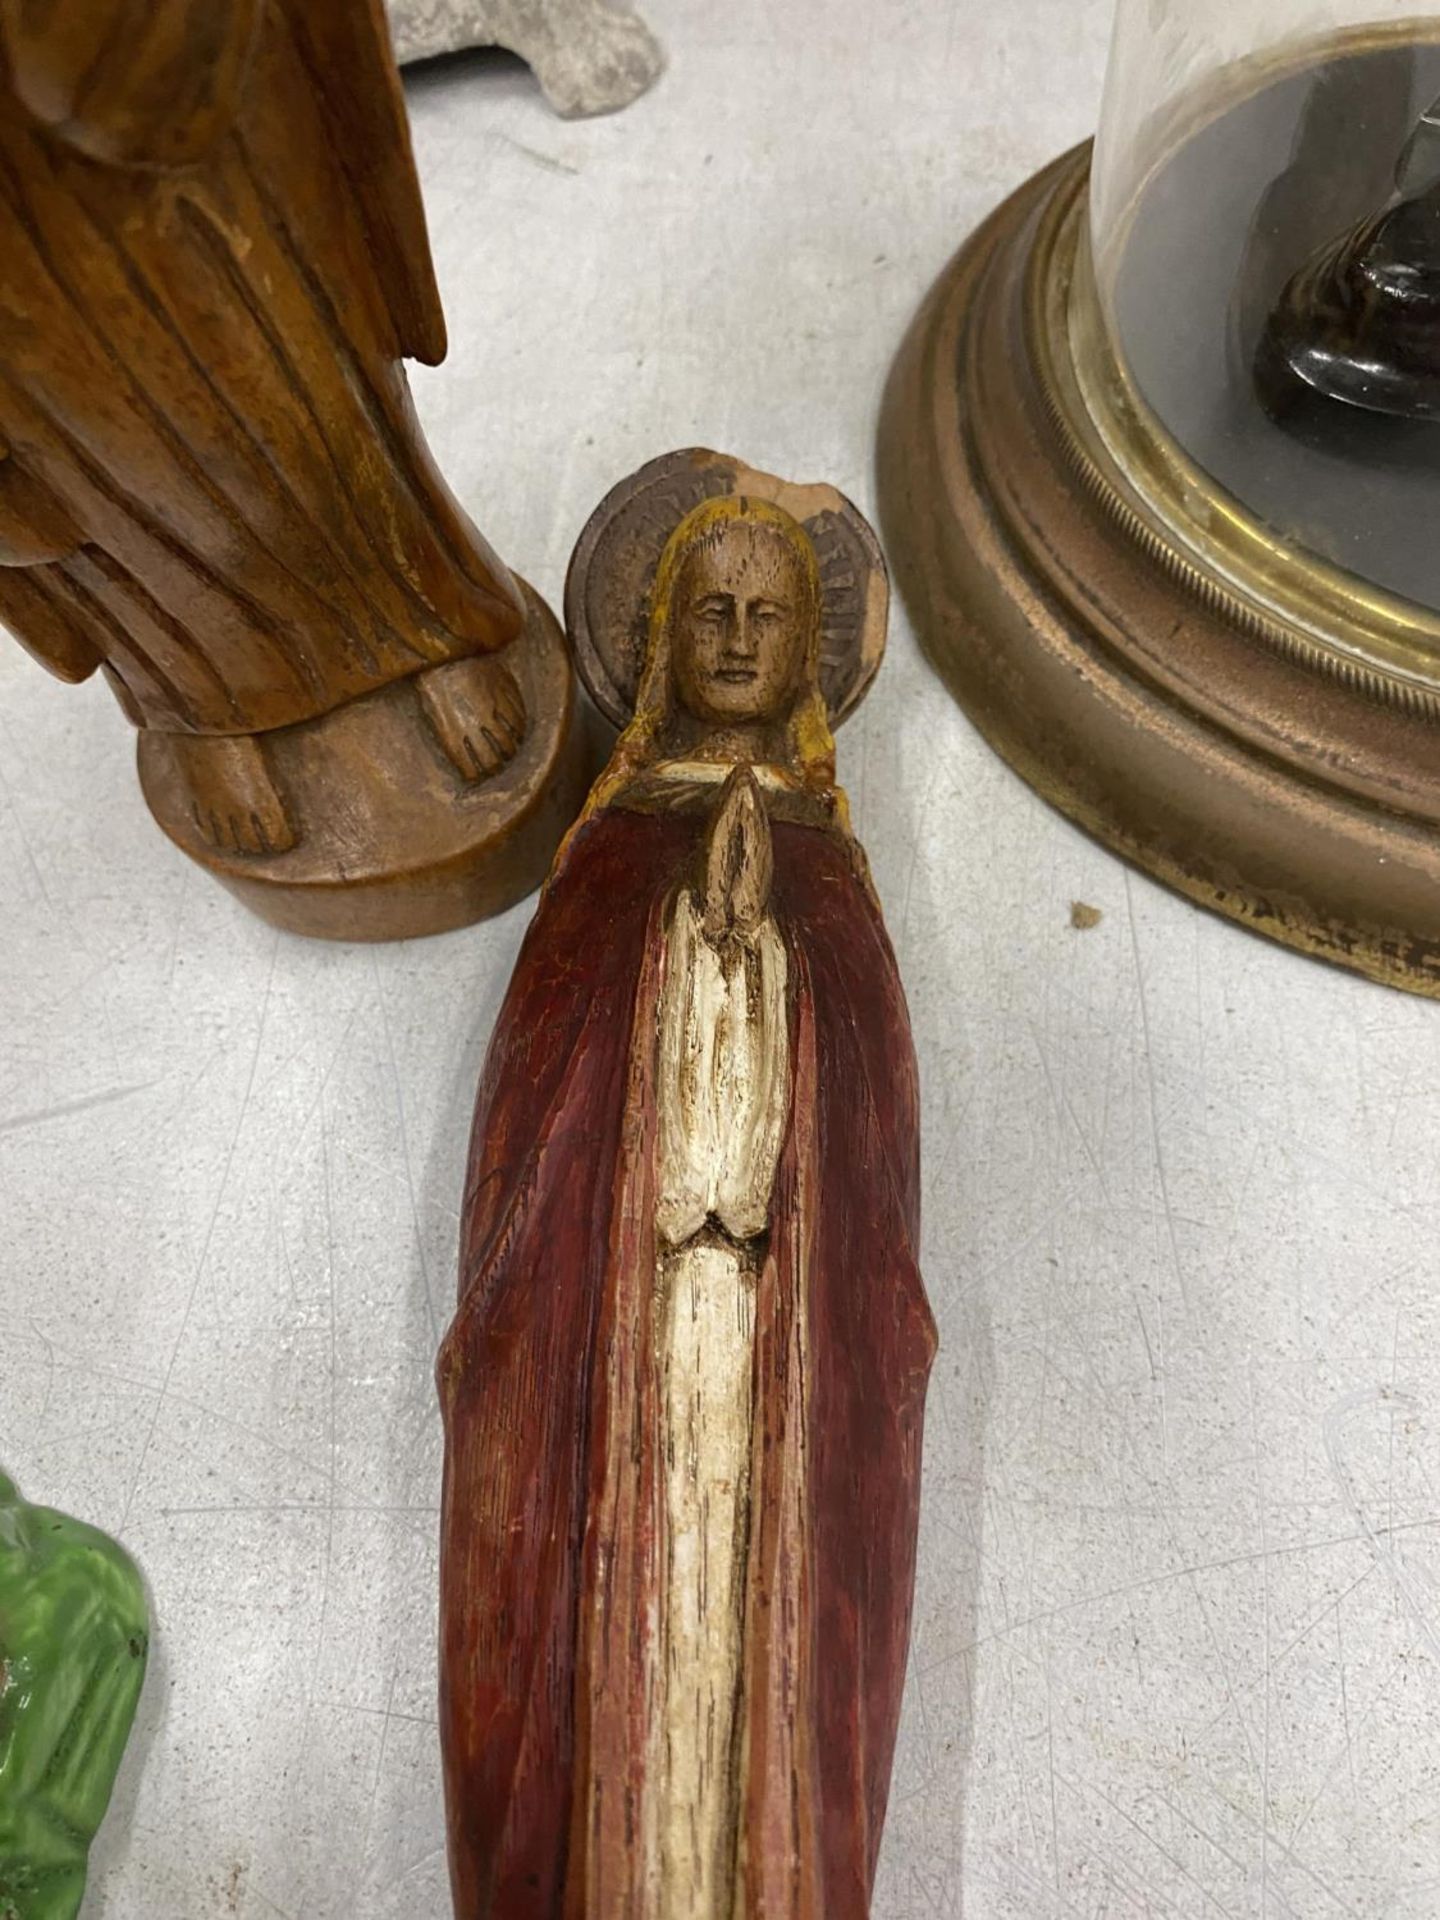 TWO RELIGIOUS CARVED WOODEN ITEMS - PRAYING MAN & JESUS MODEL - Image 3 of 4